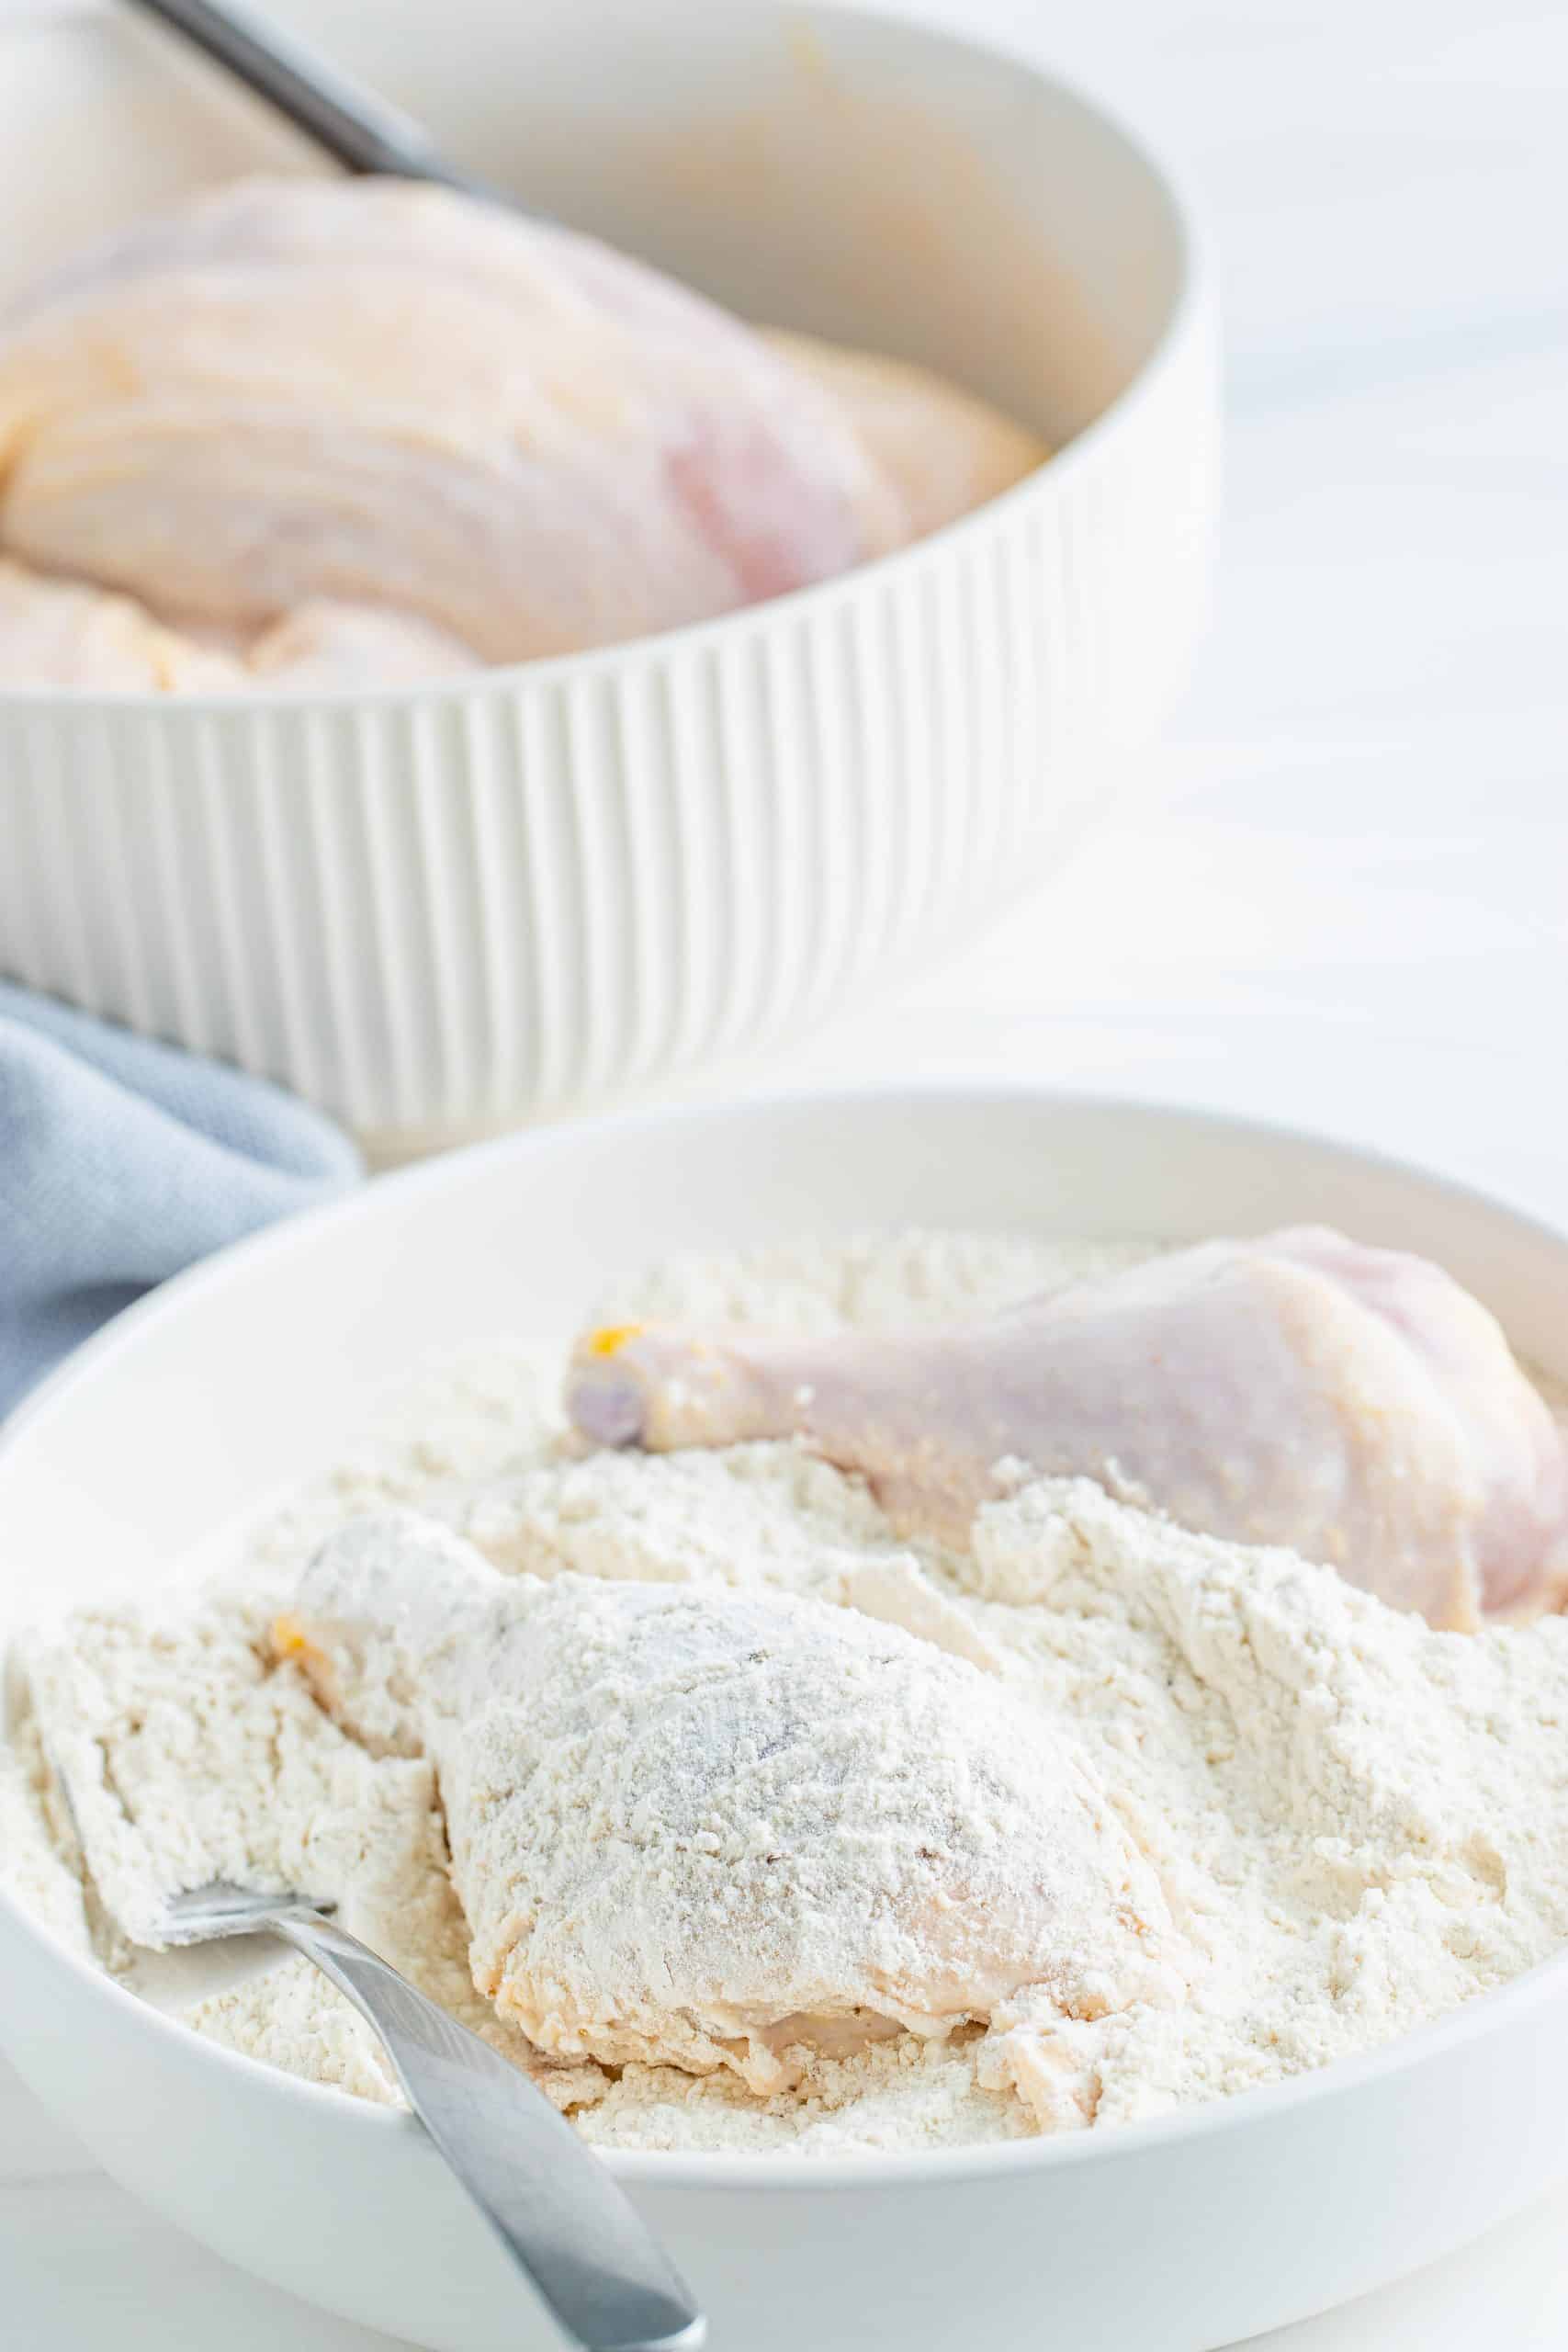 Chicken pieces being coated in flour mixture in white bowl with a fork. 